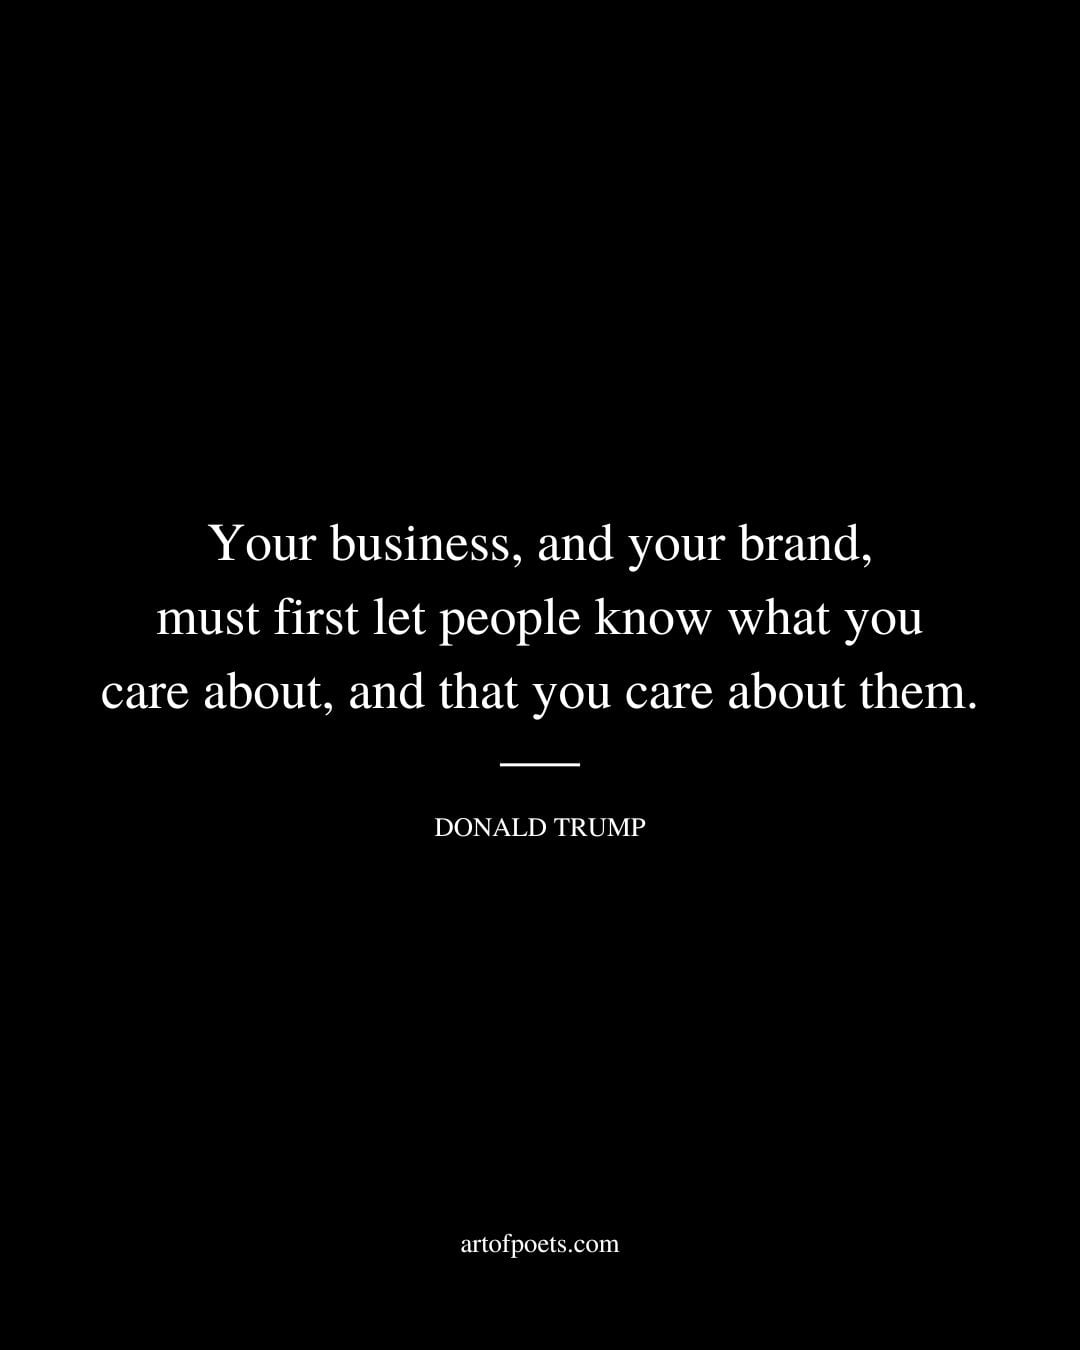 Your business and your brand must first let people know what you care about and that you care about them